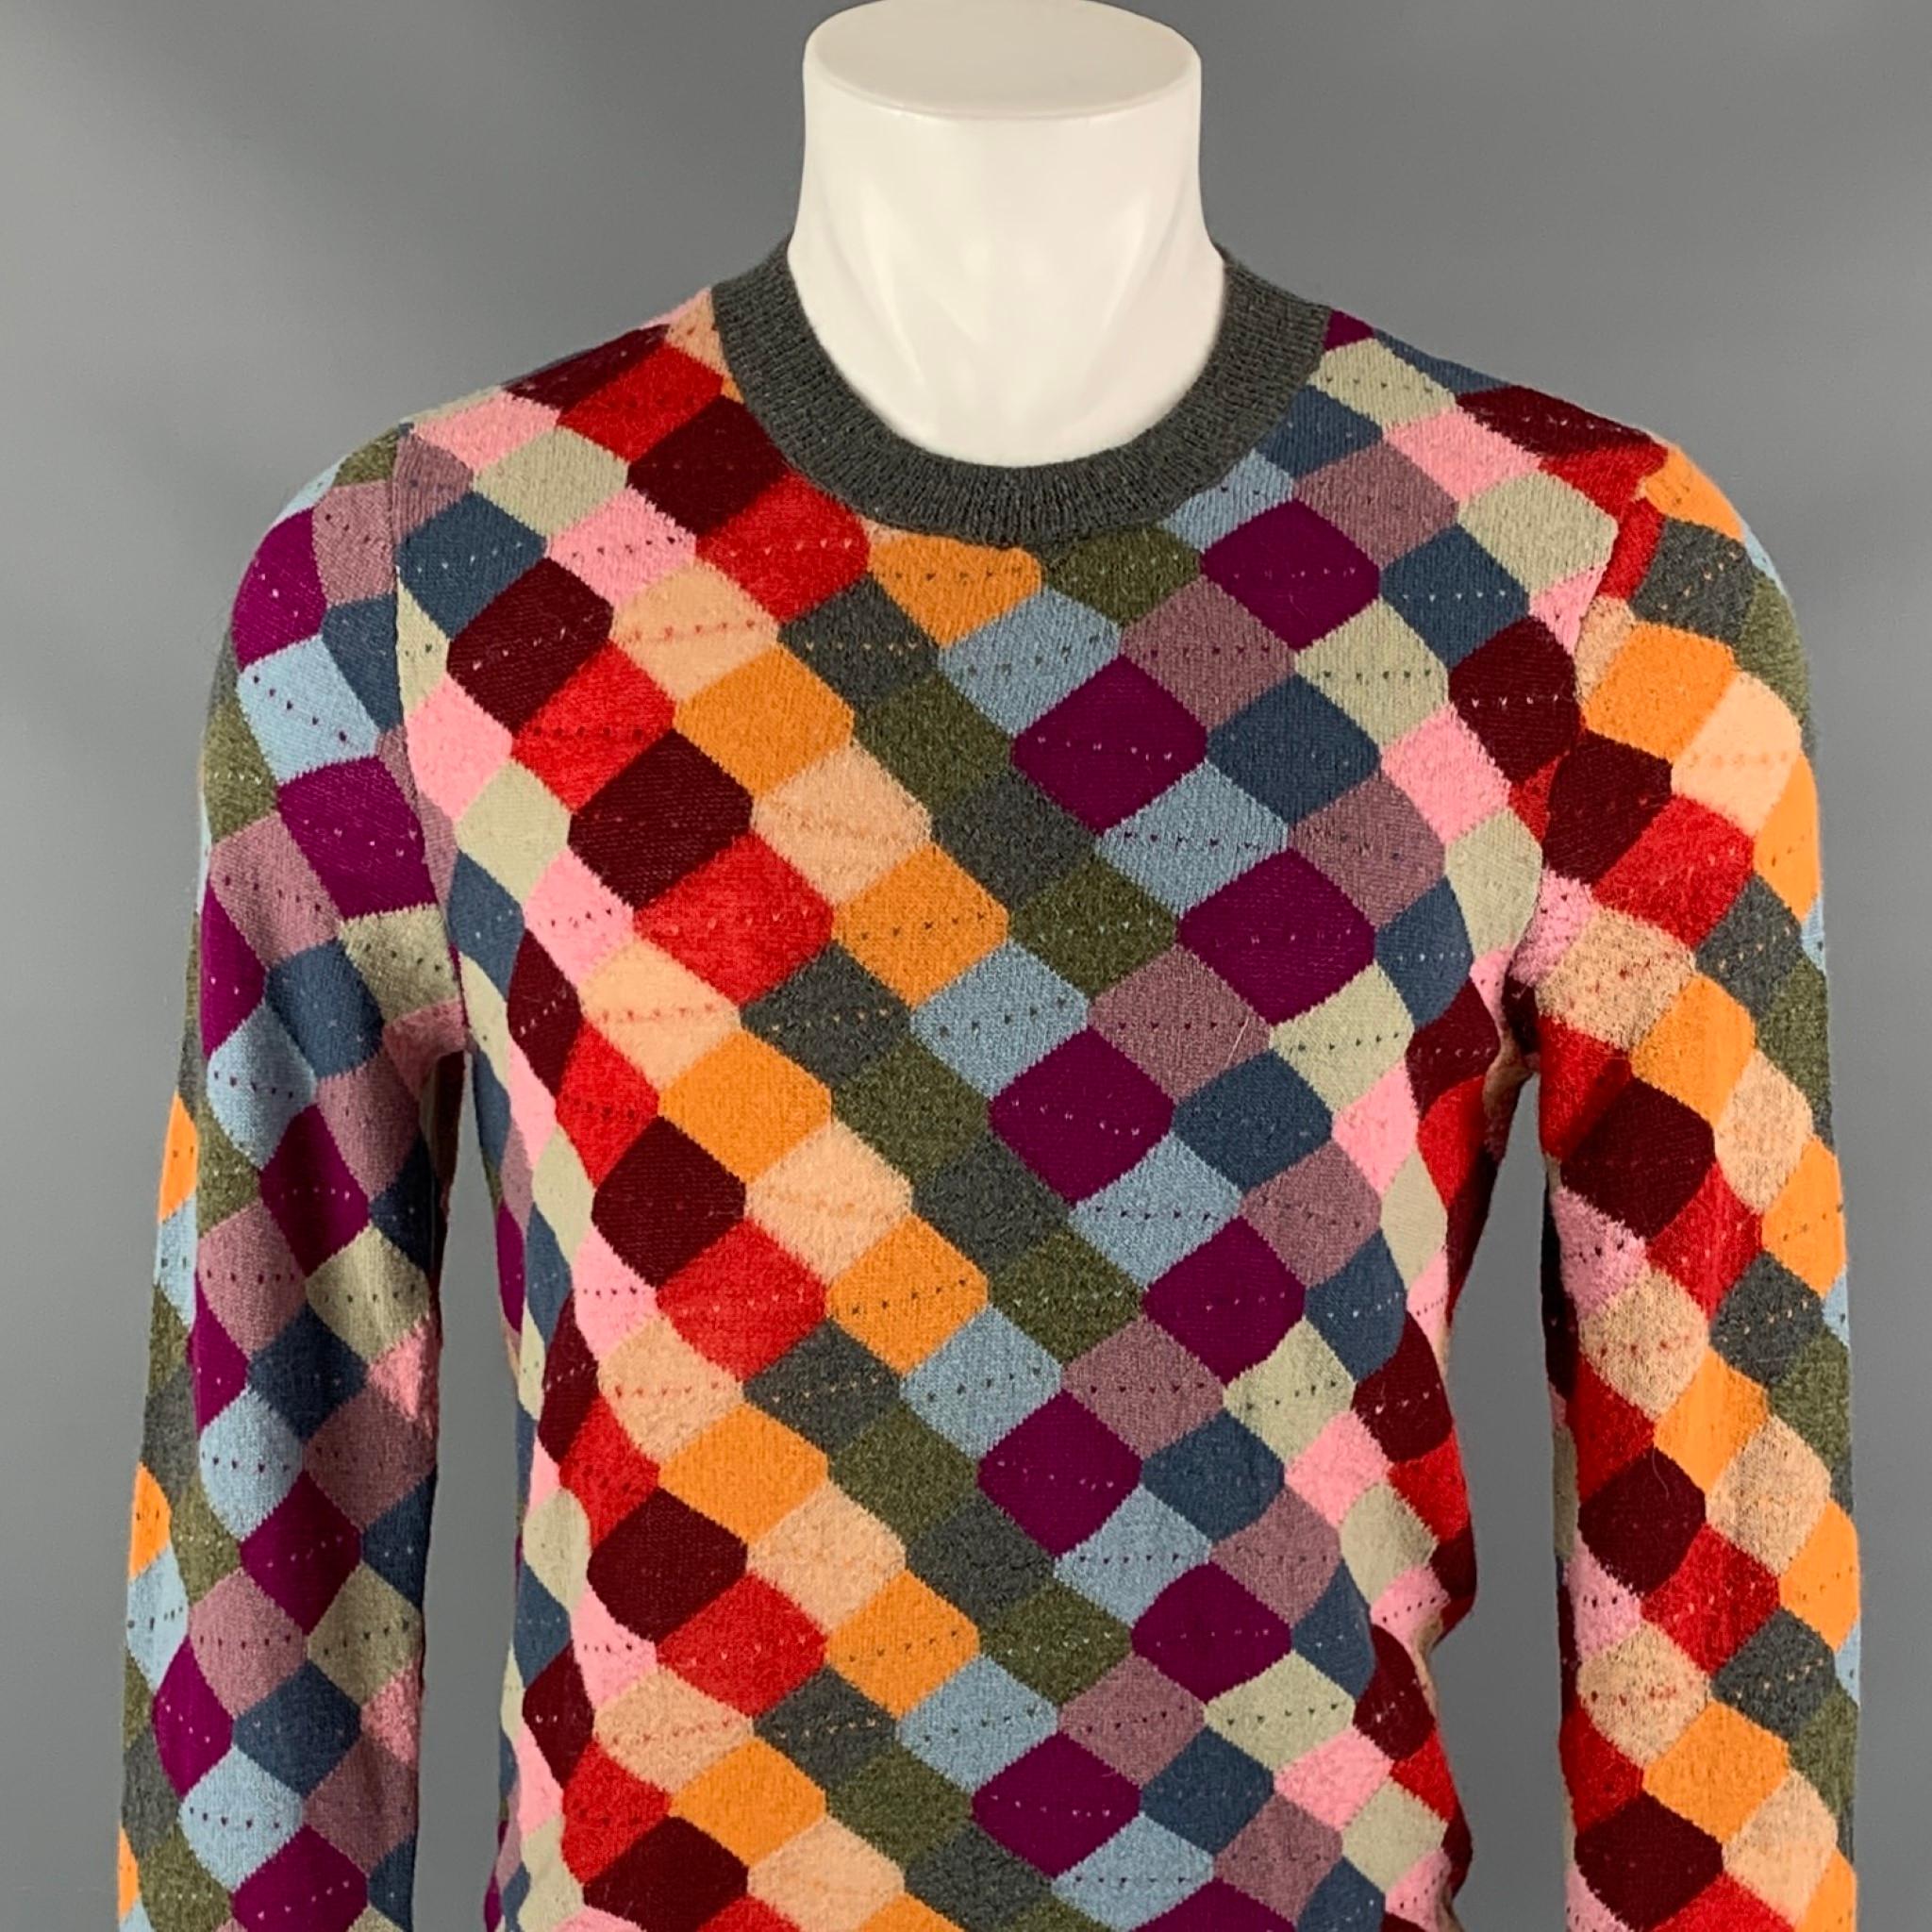 GUCCI pullover comes in a multi-color knitted square mohair blend featuring a ribbed hem and a crew-neck. Made in Italy 

Very Good Pre-Owned Condition.
Marked: S

Measurements:

Shoulder: 16.5 in.
Chest: 38 in.
Sleeve: 29.5 in.
Length: 25 in.